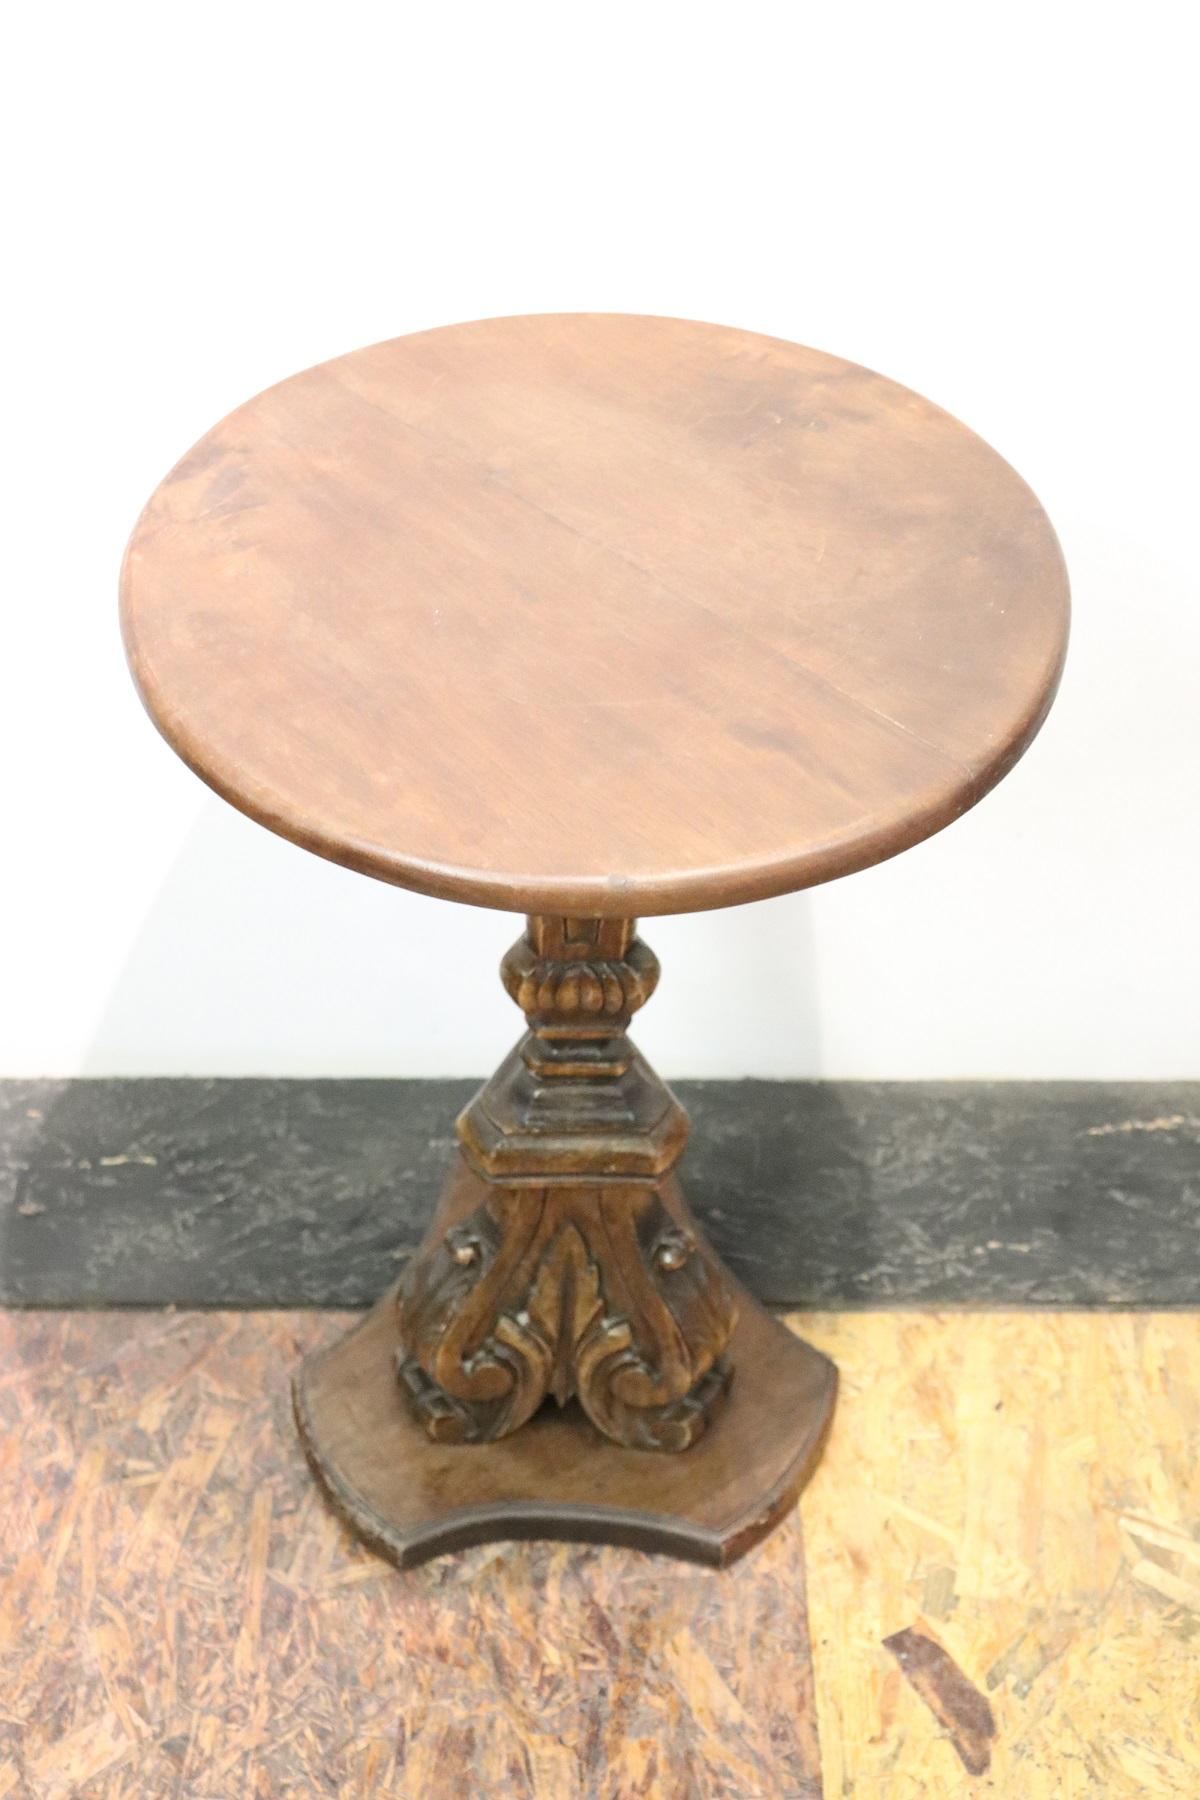 19th Century Italian Carved Walnut Round Side Table or Pedestal Table 2